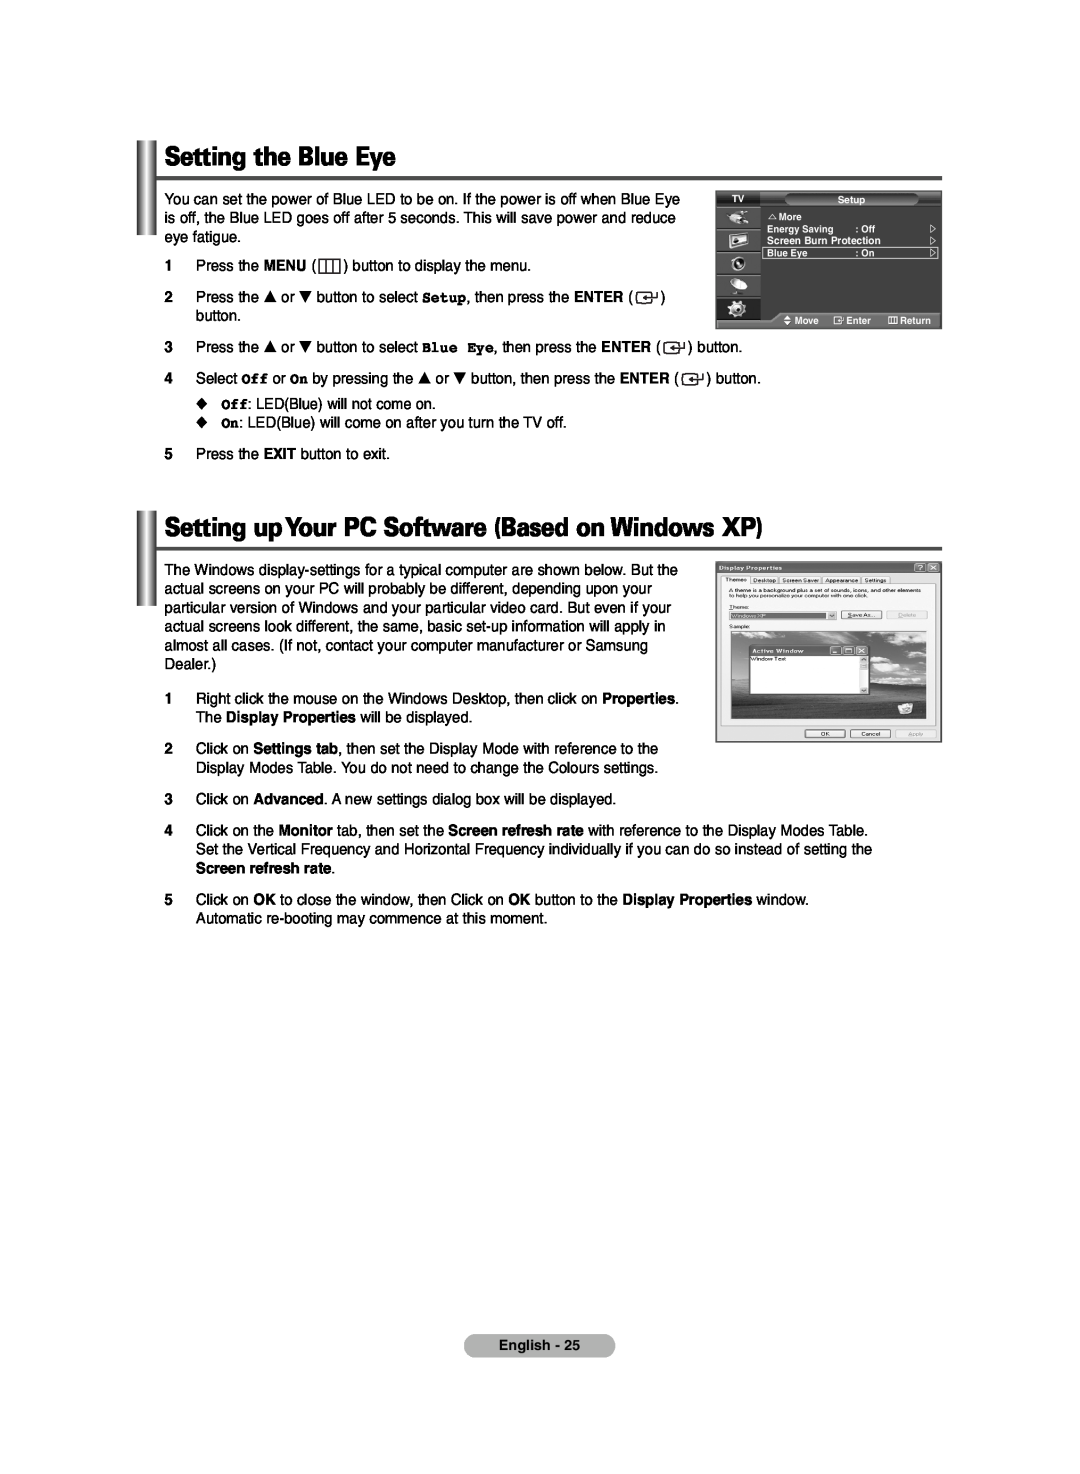 Samsung PDP-TELEVISION manual Setting the Blue Eye, Setting upYour PC Software Based on Windows XP 